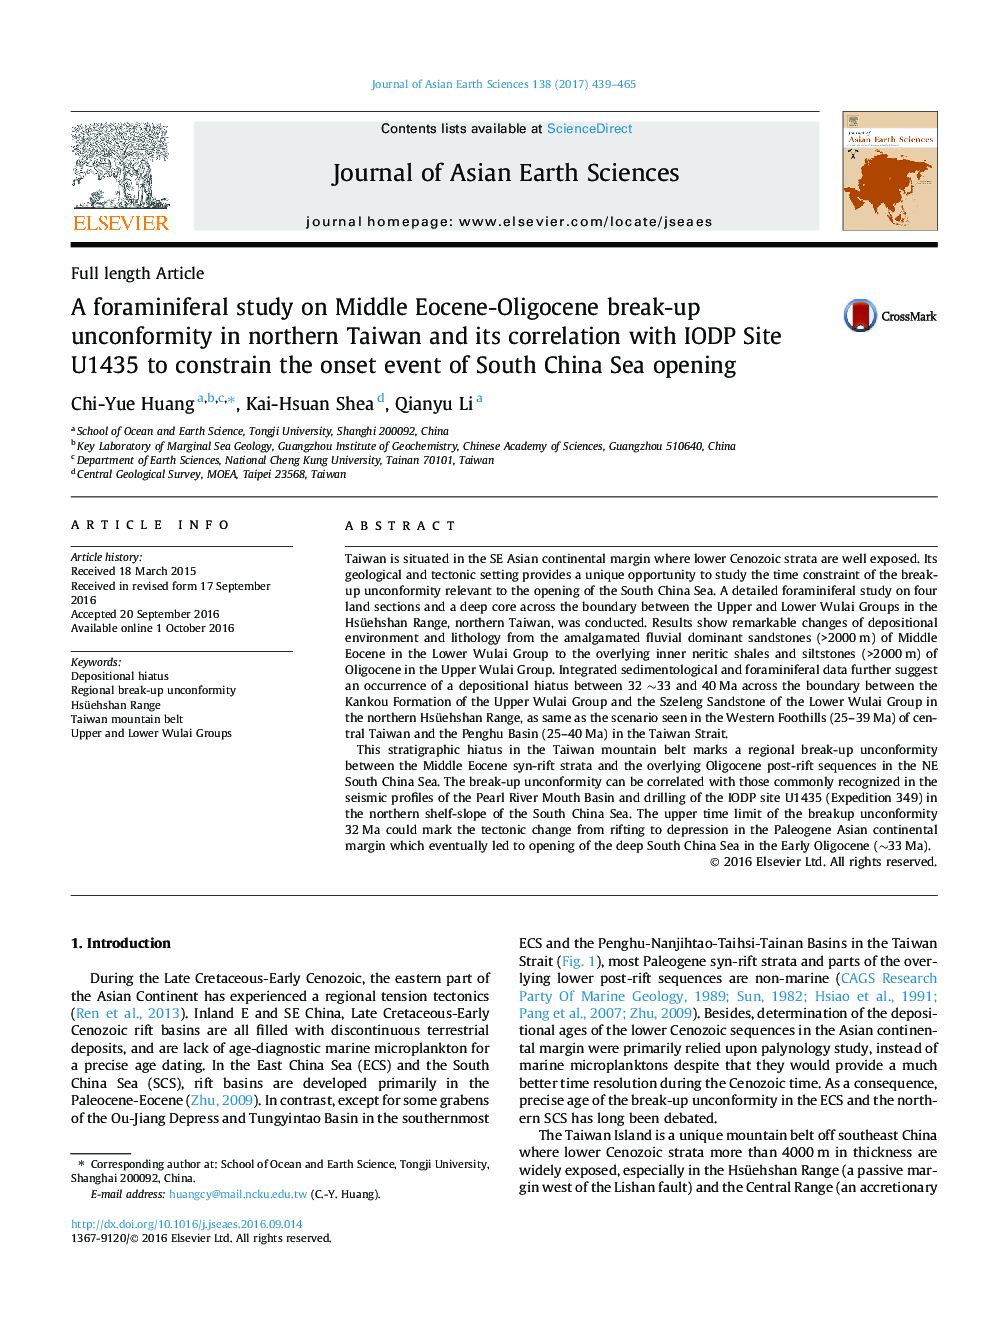 Full length ArticleA foraminiferal study on Middle Eocene-Oligocene break-up unconformity in northern Taiwan and its correlation with IODP Site U1435 to constrain the onset event of South China Sea opening